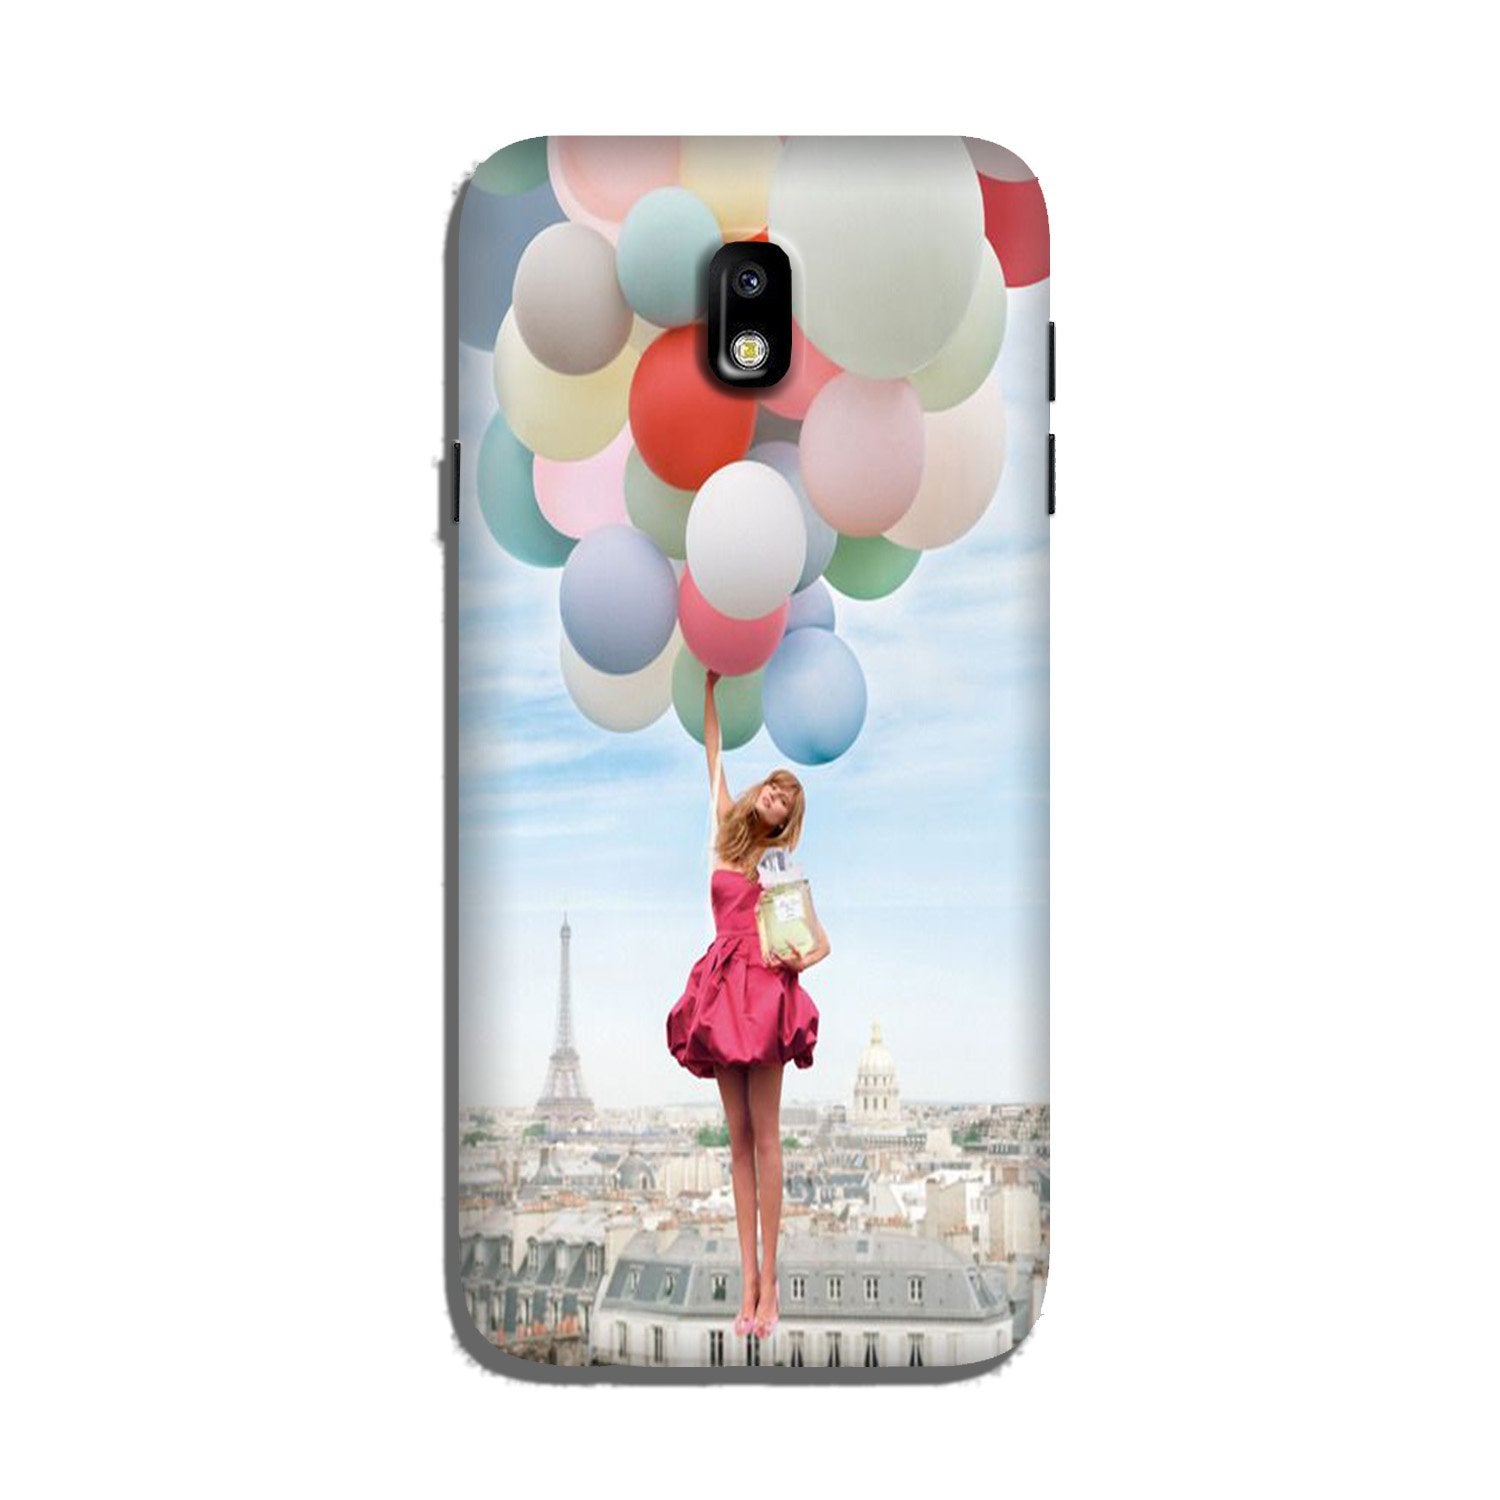 Girl with Baloon Case for Galaxy J5 Pro